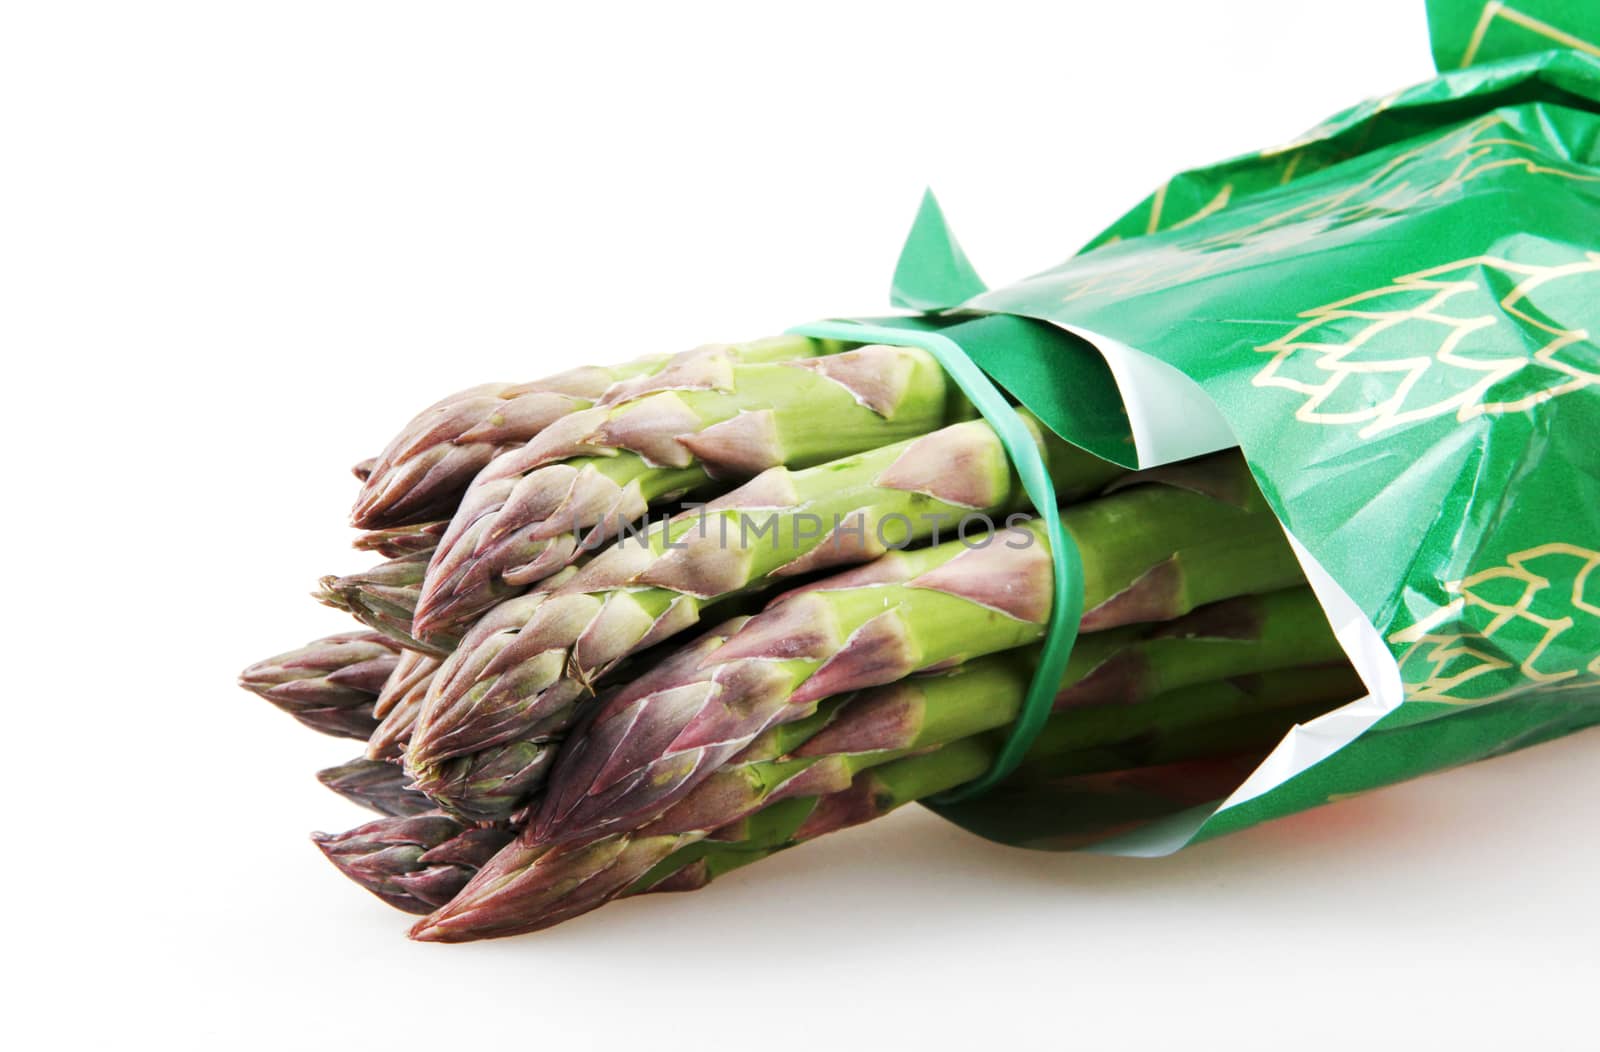 Close-Up Of Asparaguses Against White Background by nenovbrothers